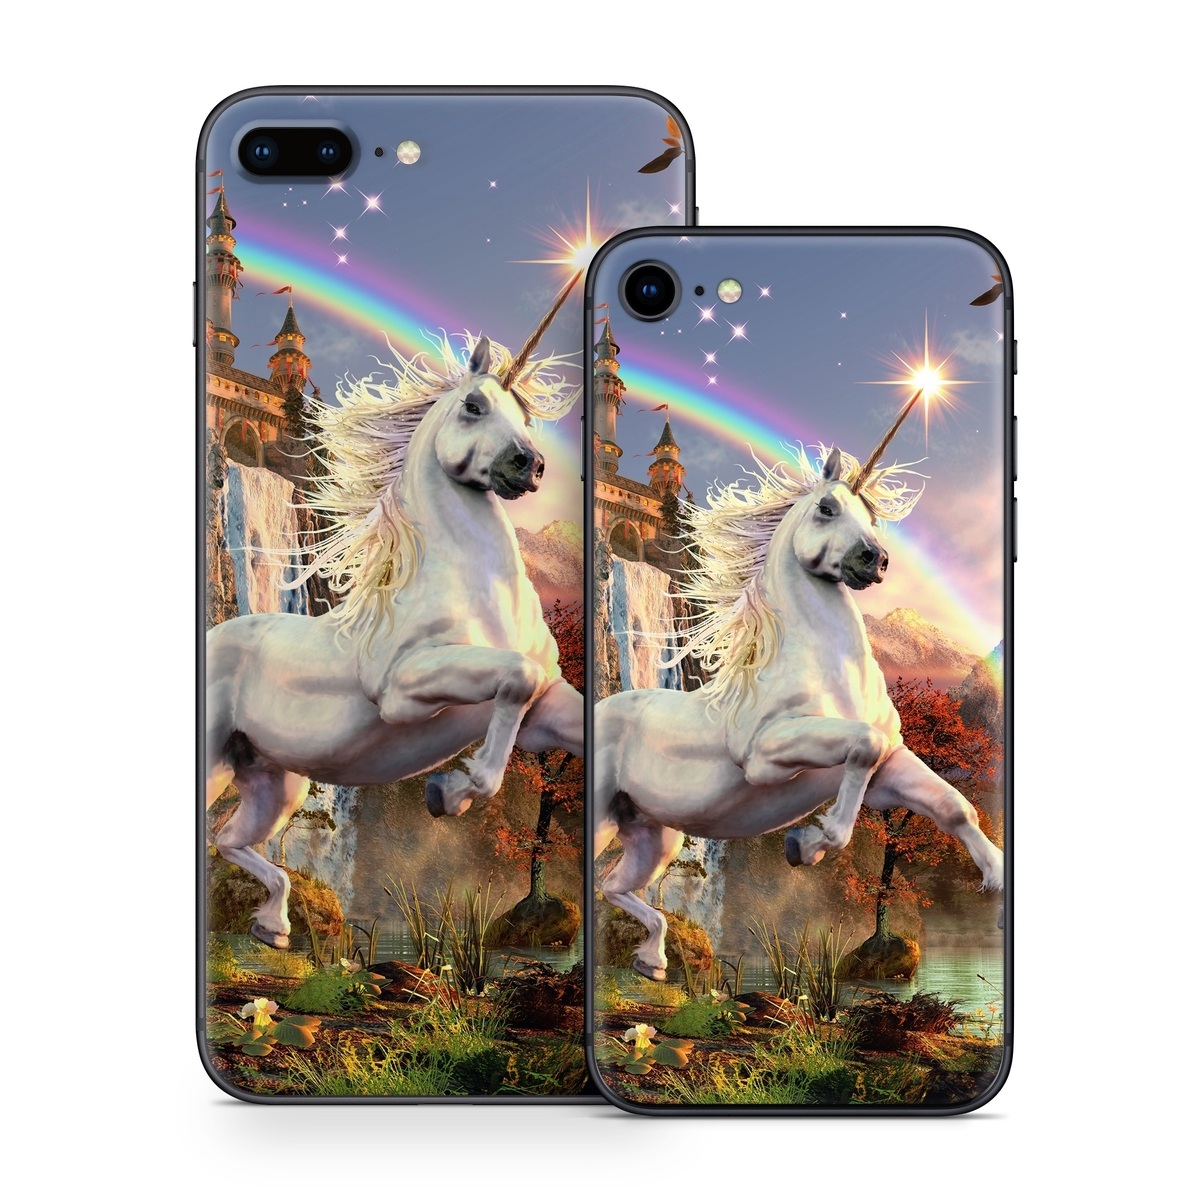 iPhone 8 Series Skin design of Nature, Unicorn, Fictional character, Sky, Mythical creature, Mythology, Cg artwork, Horse, Mane, Wildlife, with black, gray, red, green, blue colors